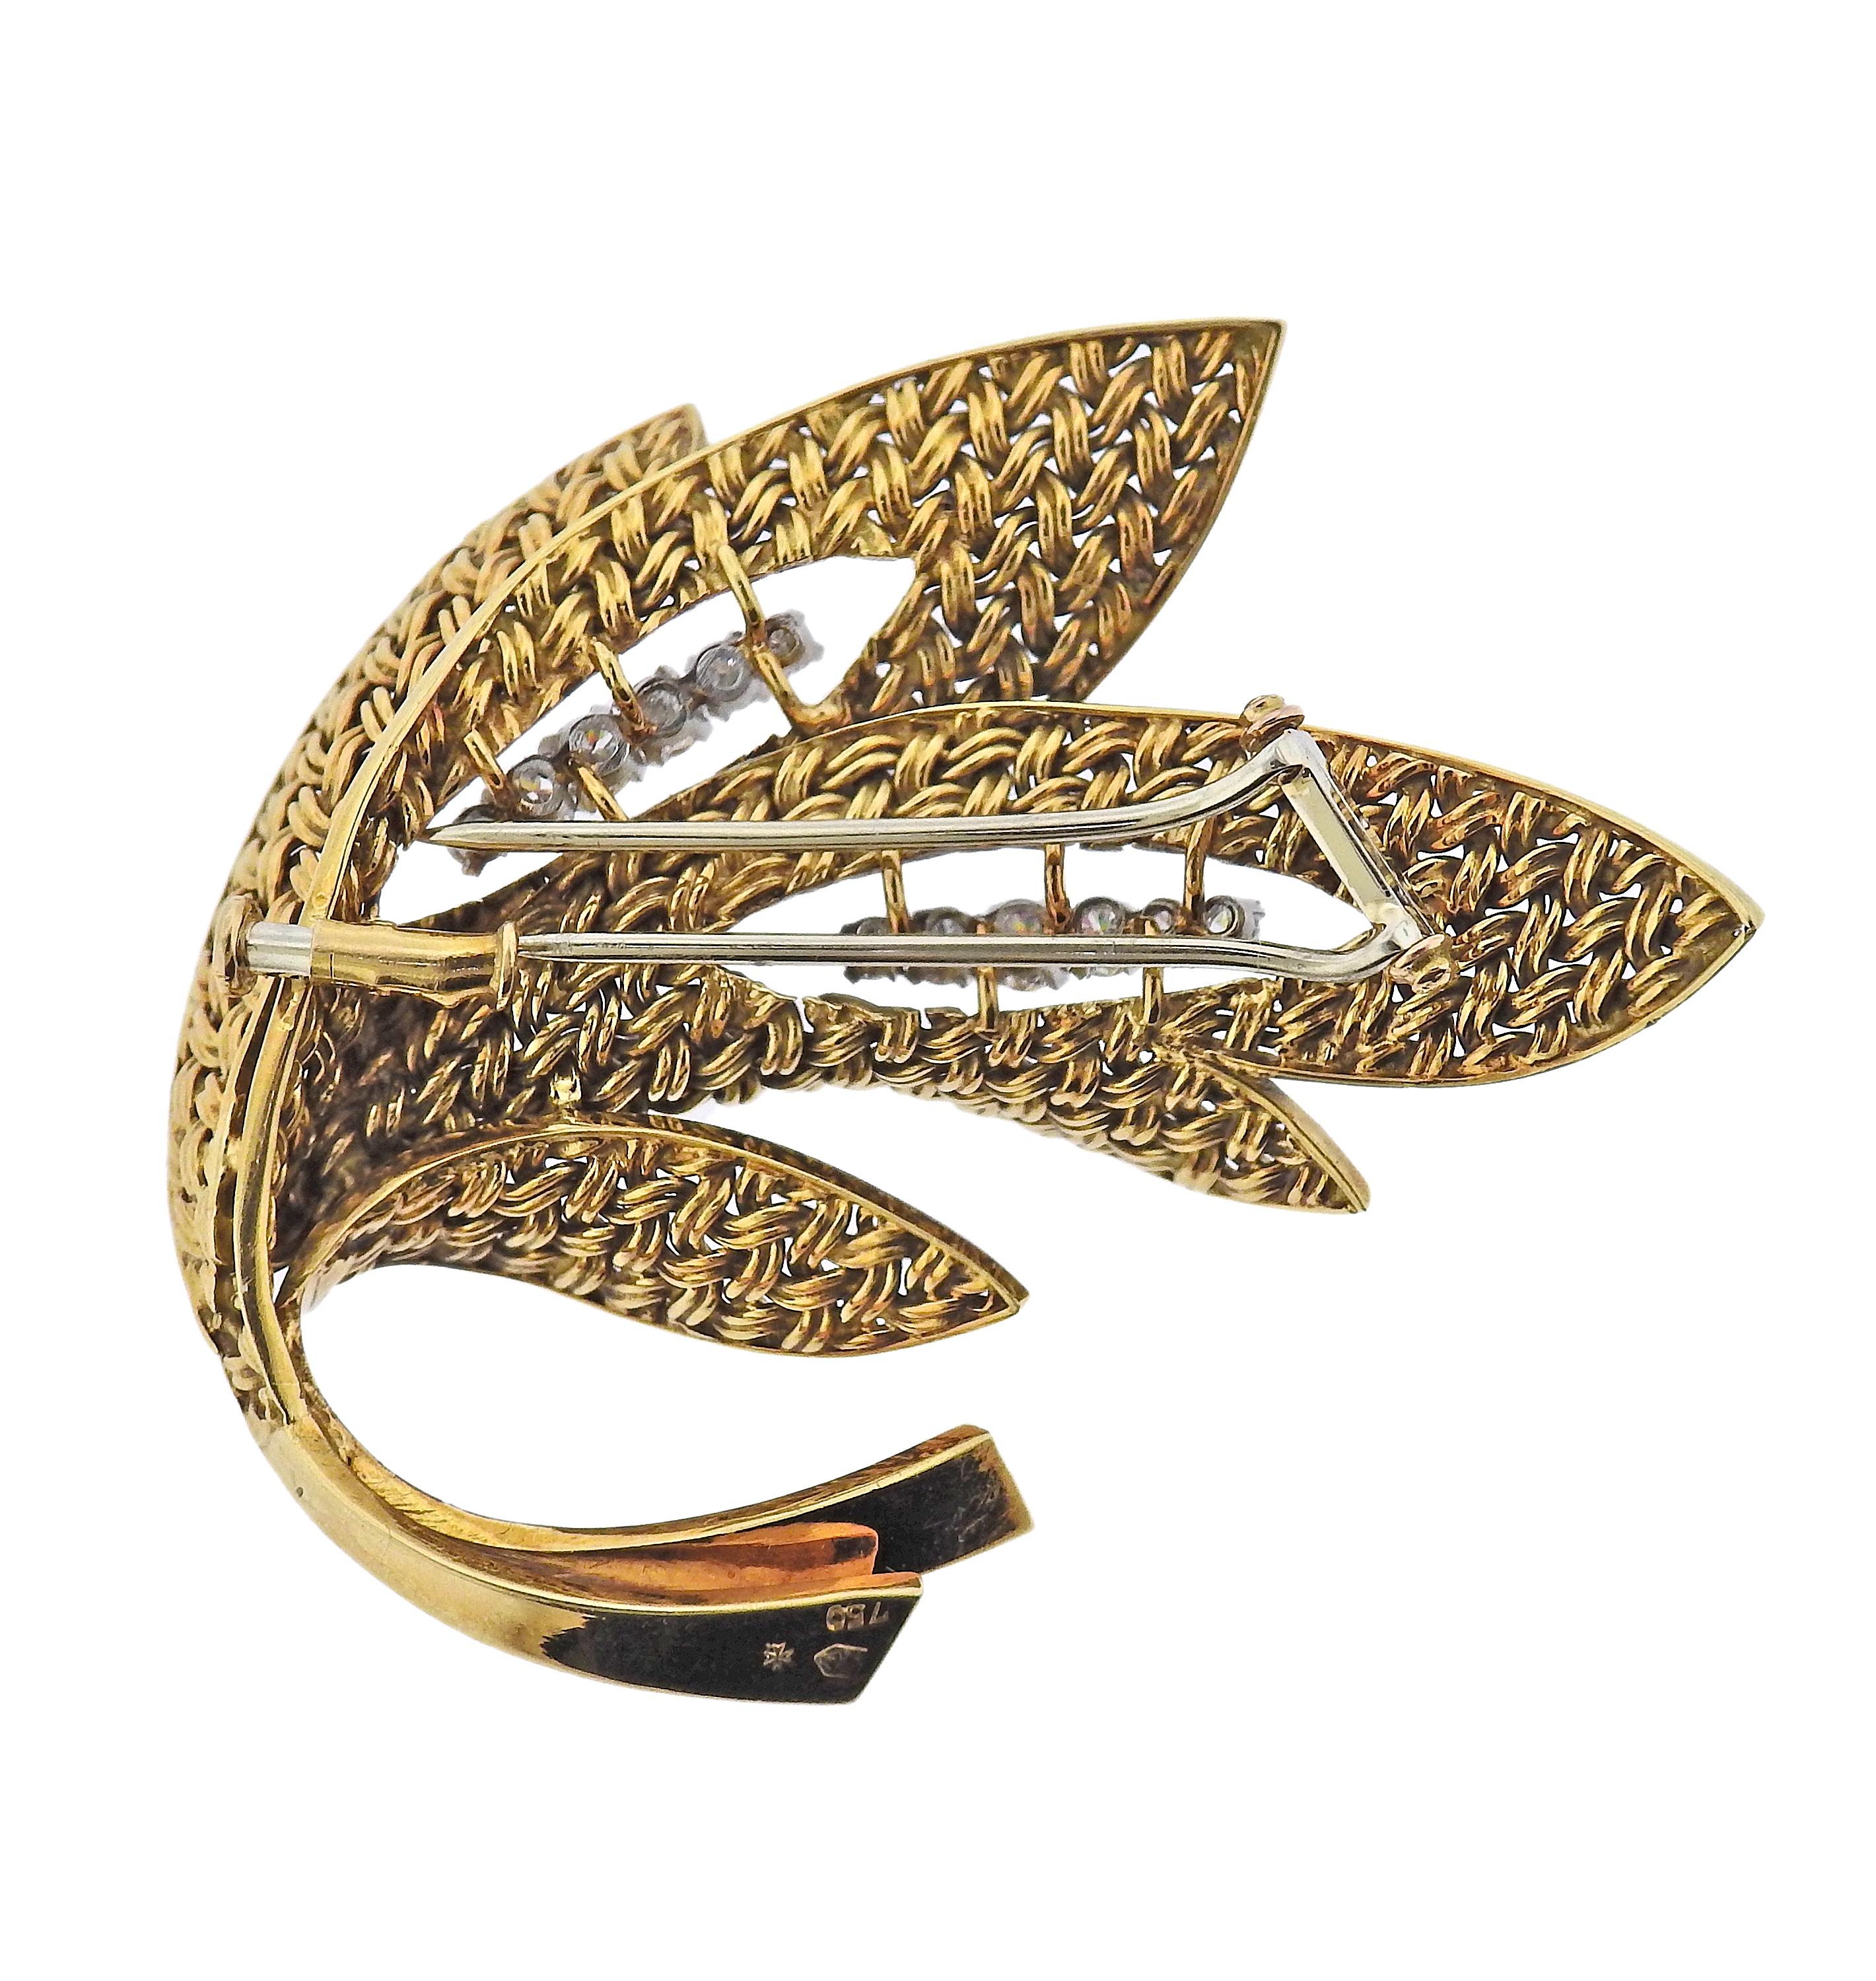 French made, Midcentury 18k gold brooch, with approx. 0.50ctw in diamonds. Brooch measures 50mm x 38mm. Marked: 750, French hallmarks. Weight - 20.4 grams.